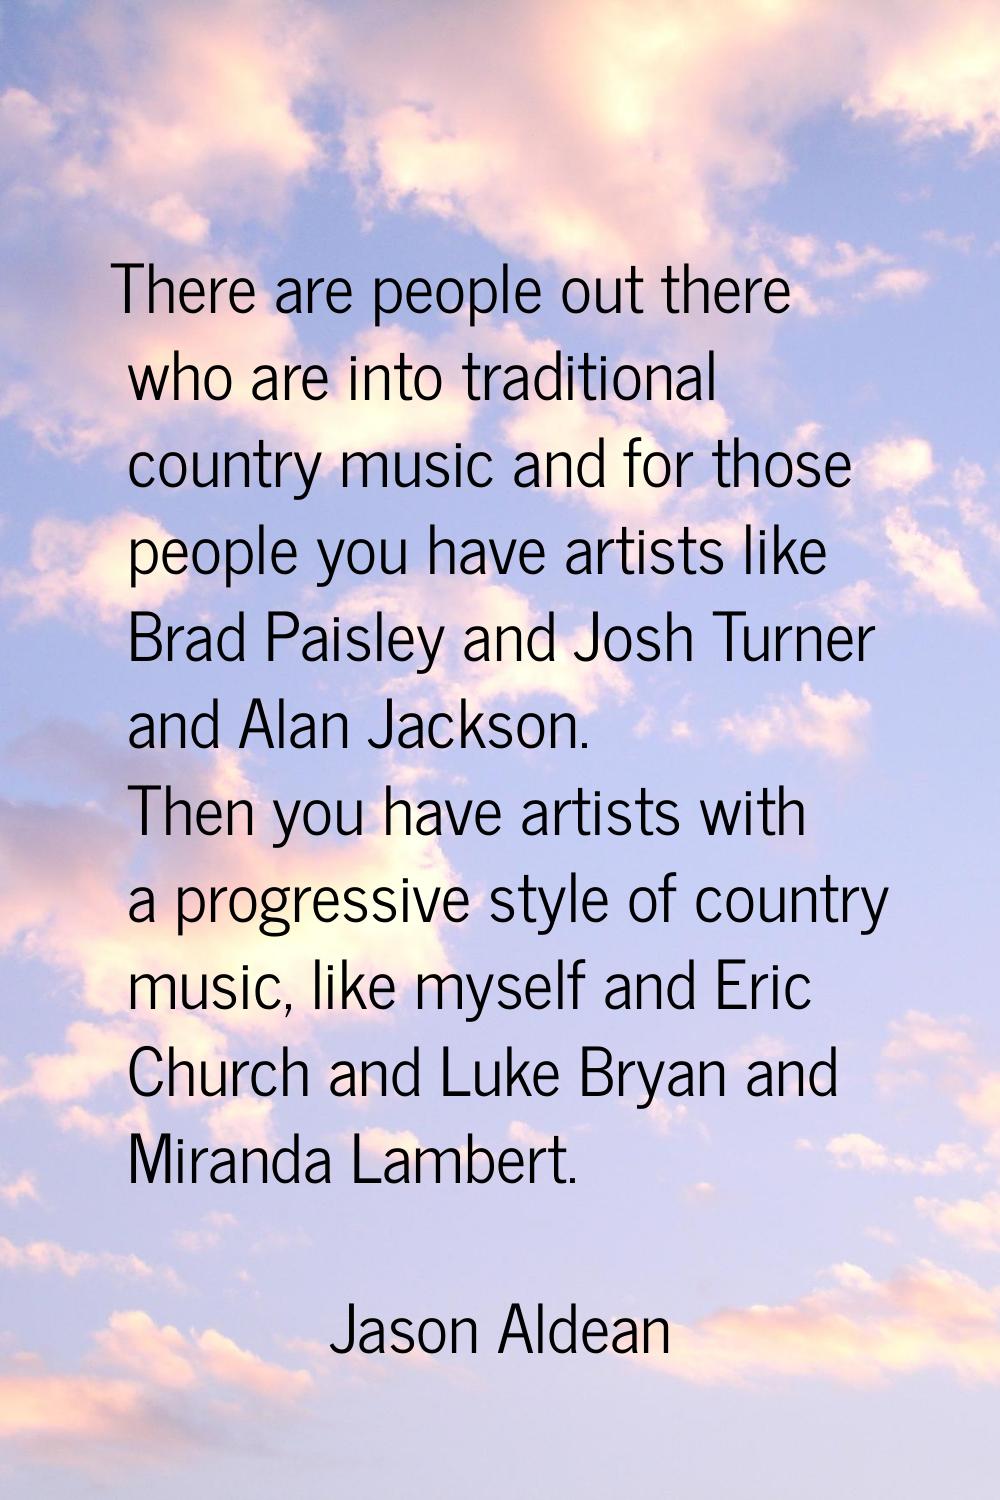 There are people out there who are into traditional country music and for those people you have art